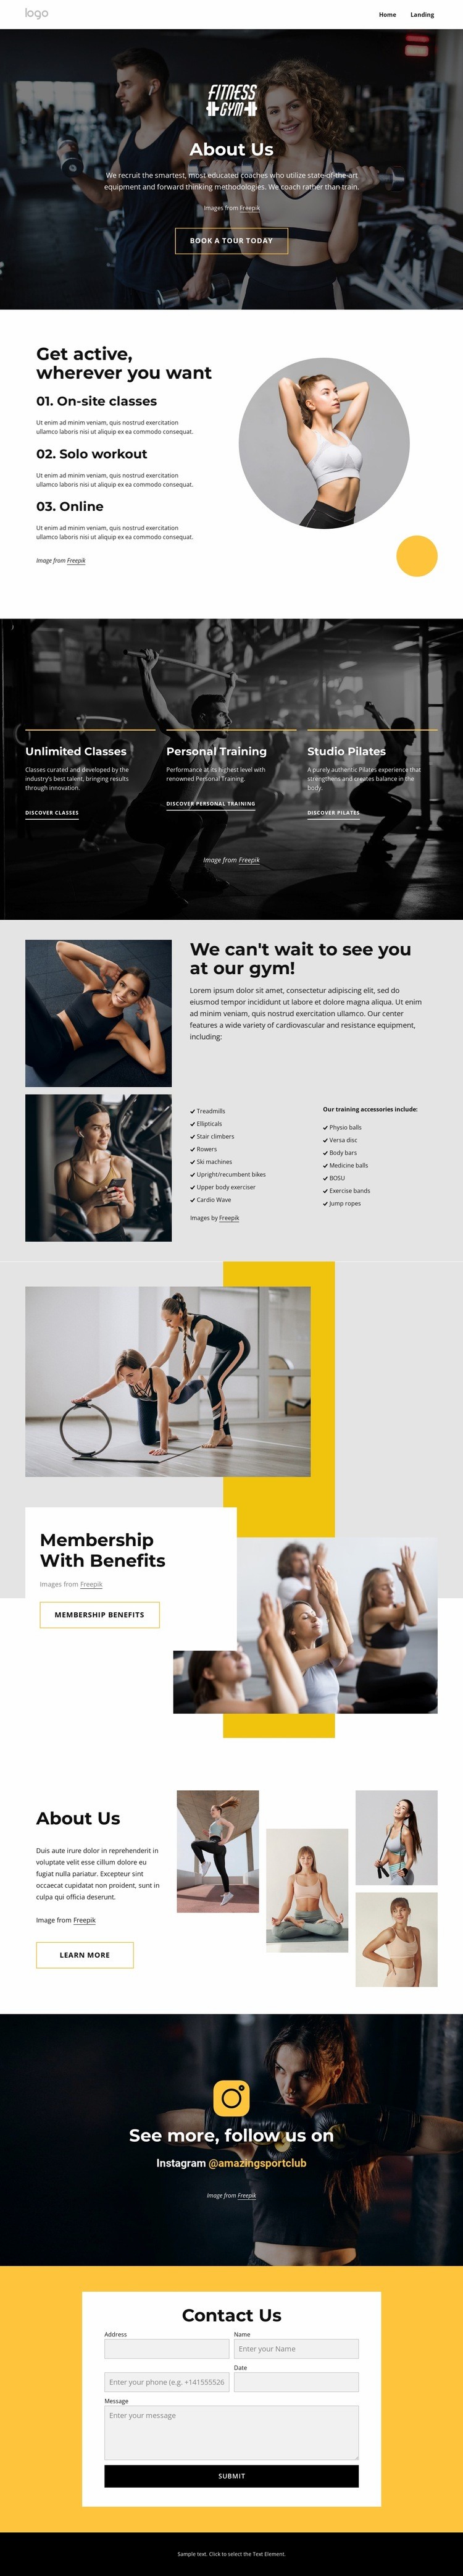 Sport and wellness center Web Page Design